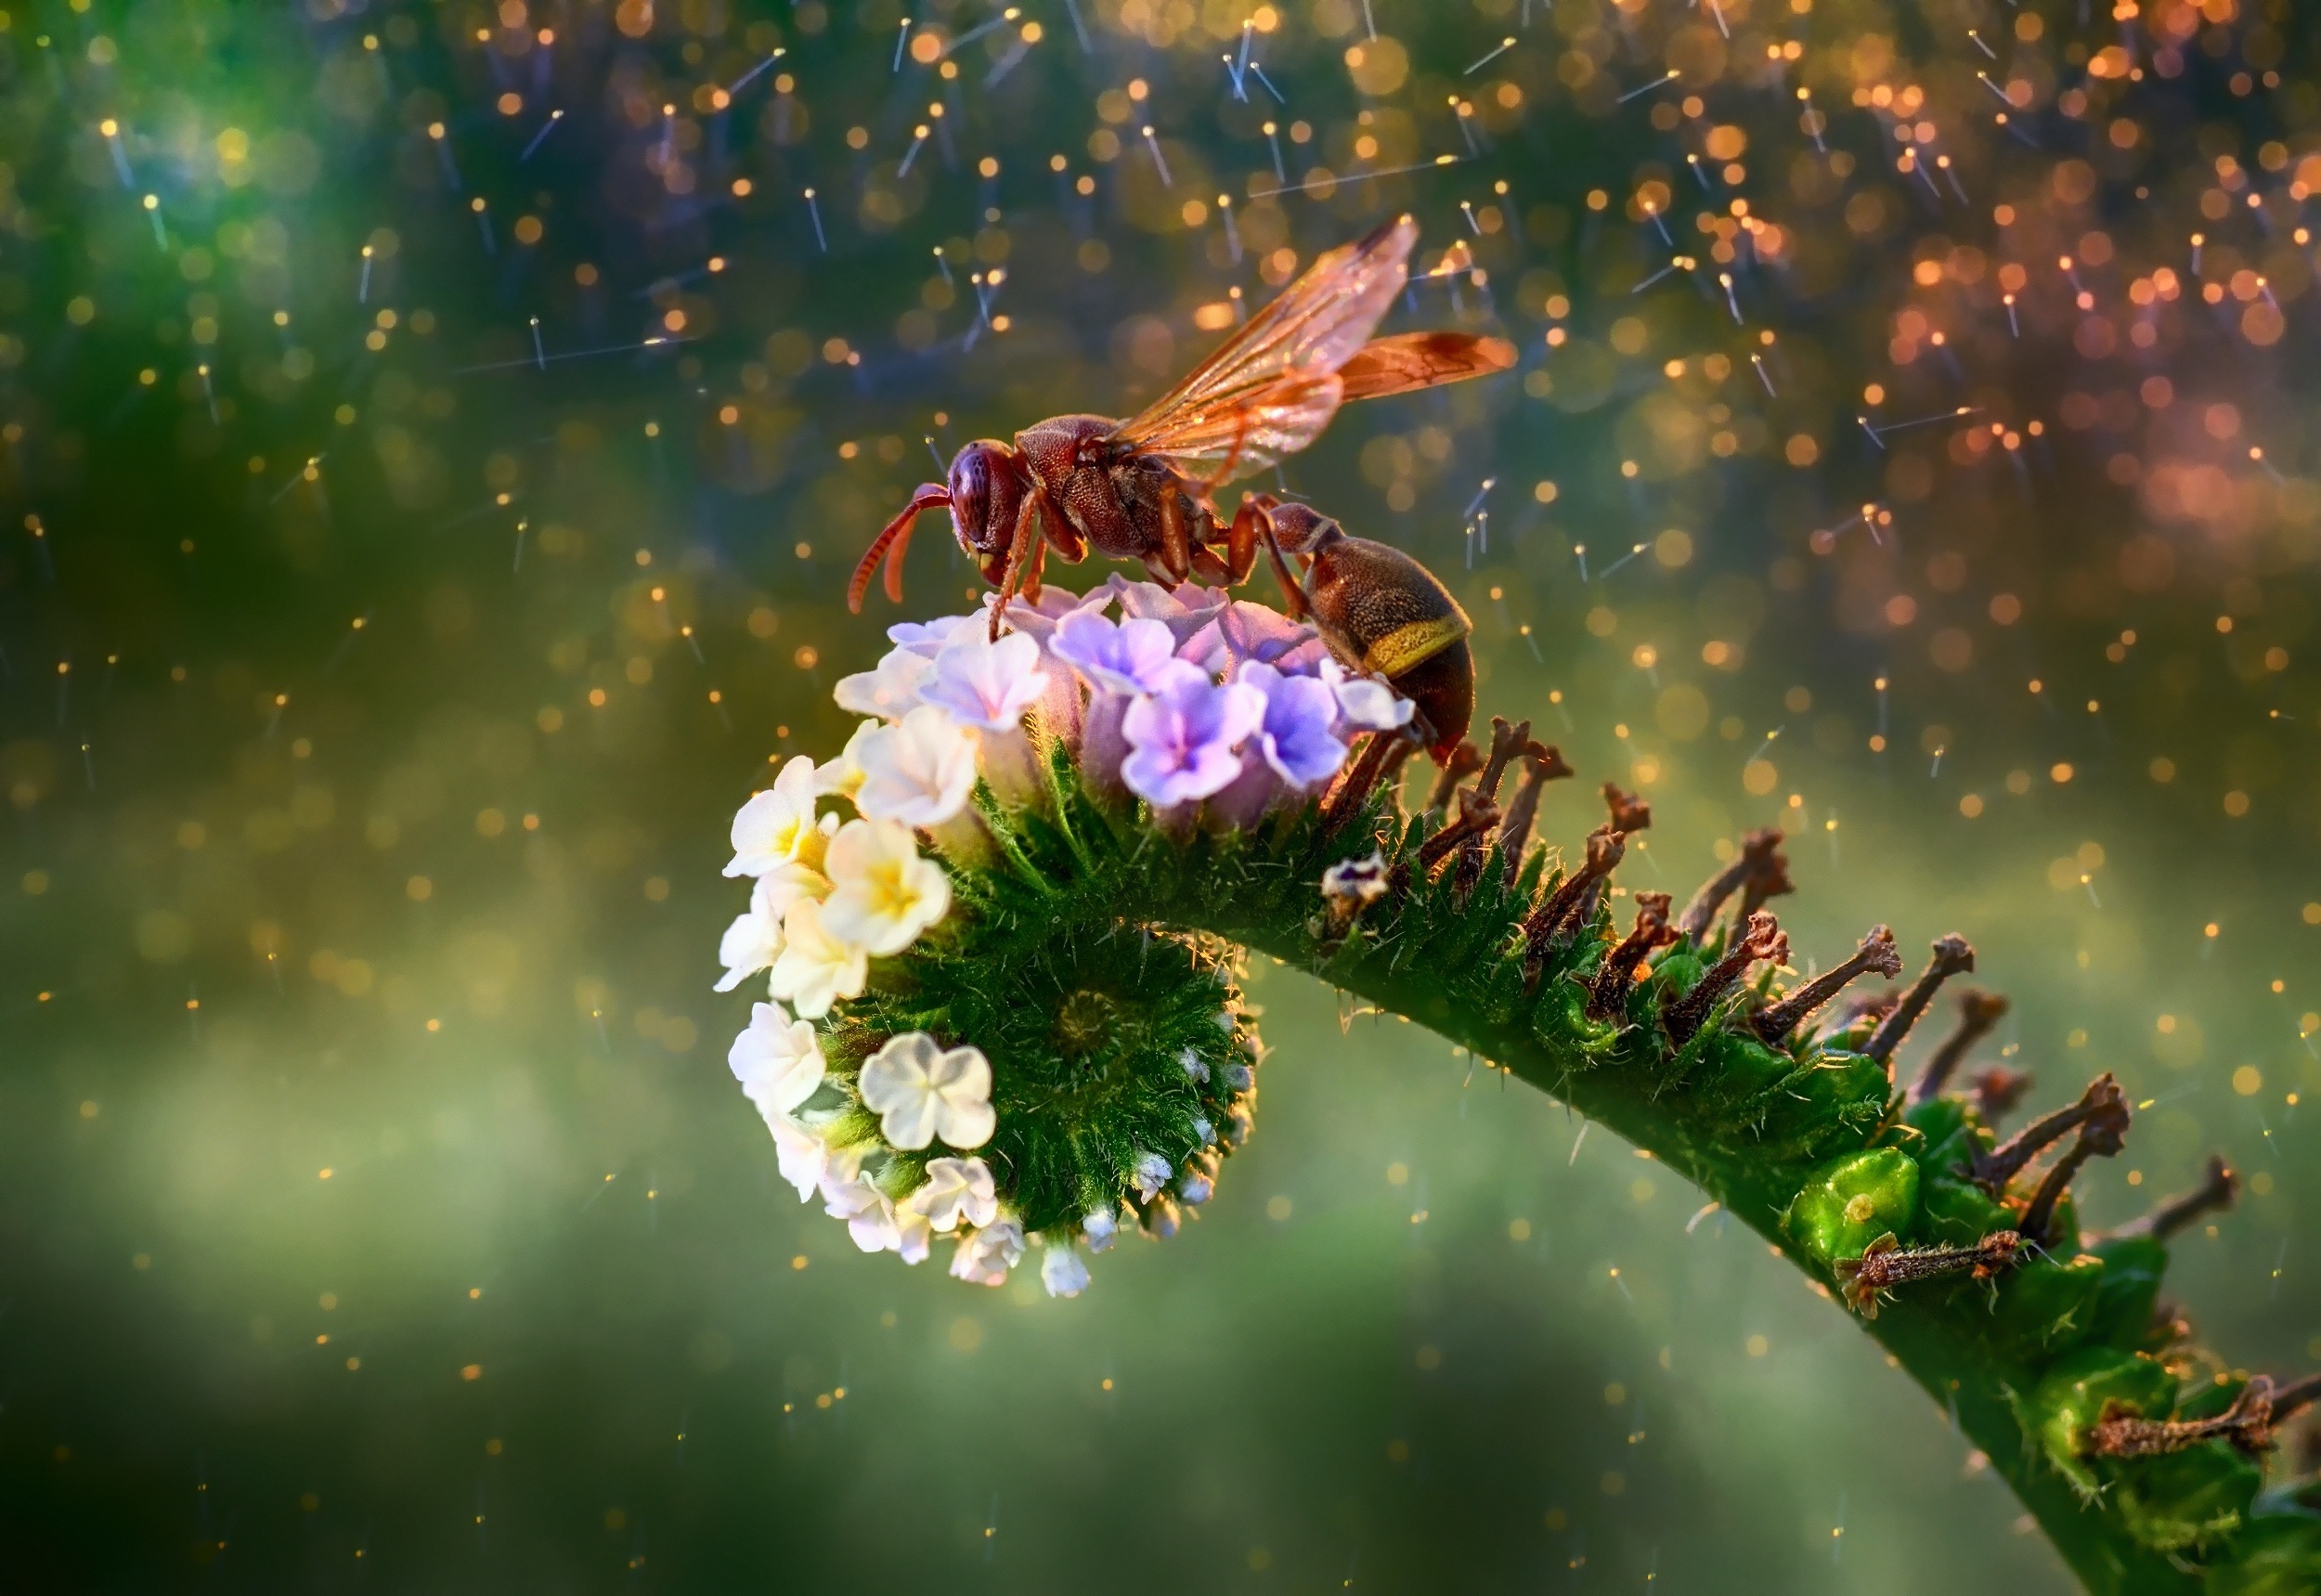 Wasp wallpapers, Insect beauty, Nature's tiny warriors, 4K resolution, 2500x1720 HD Desktop